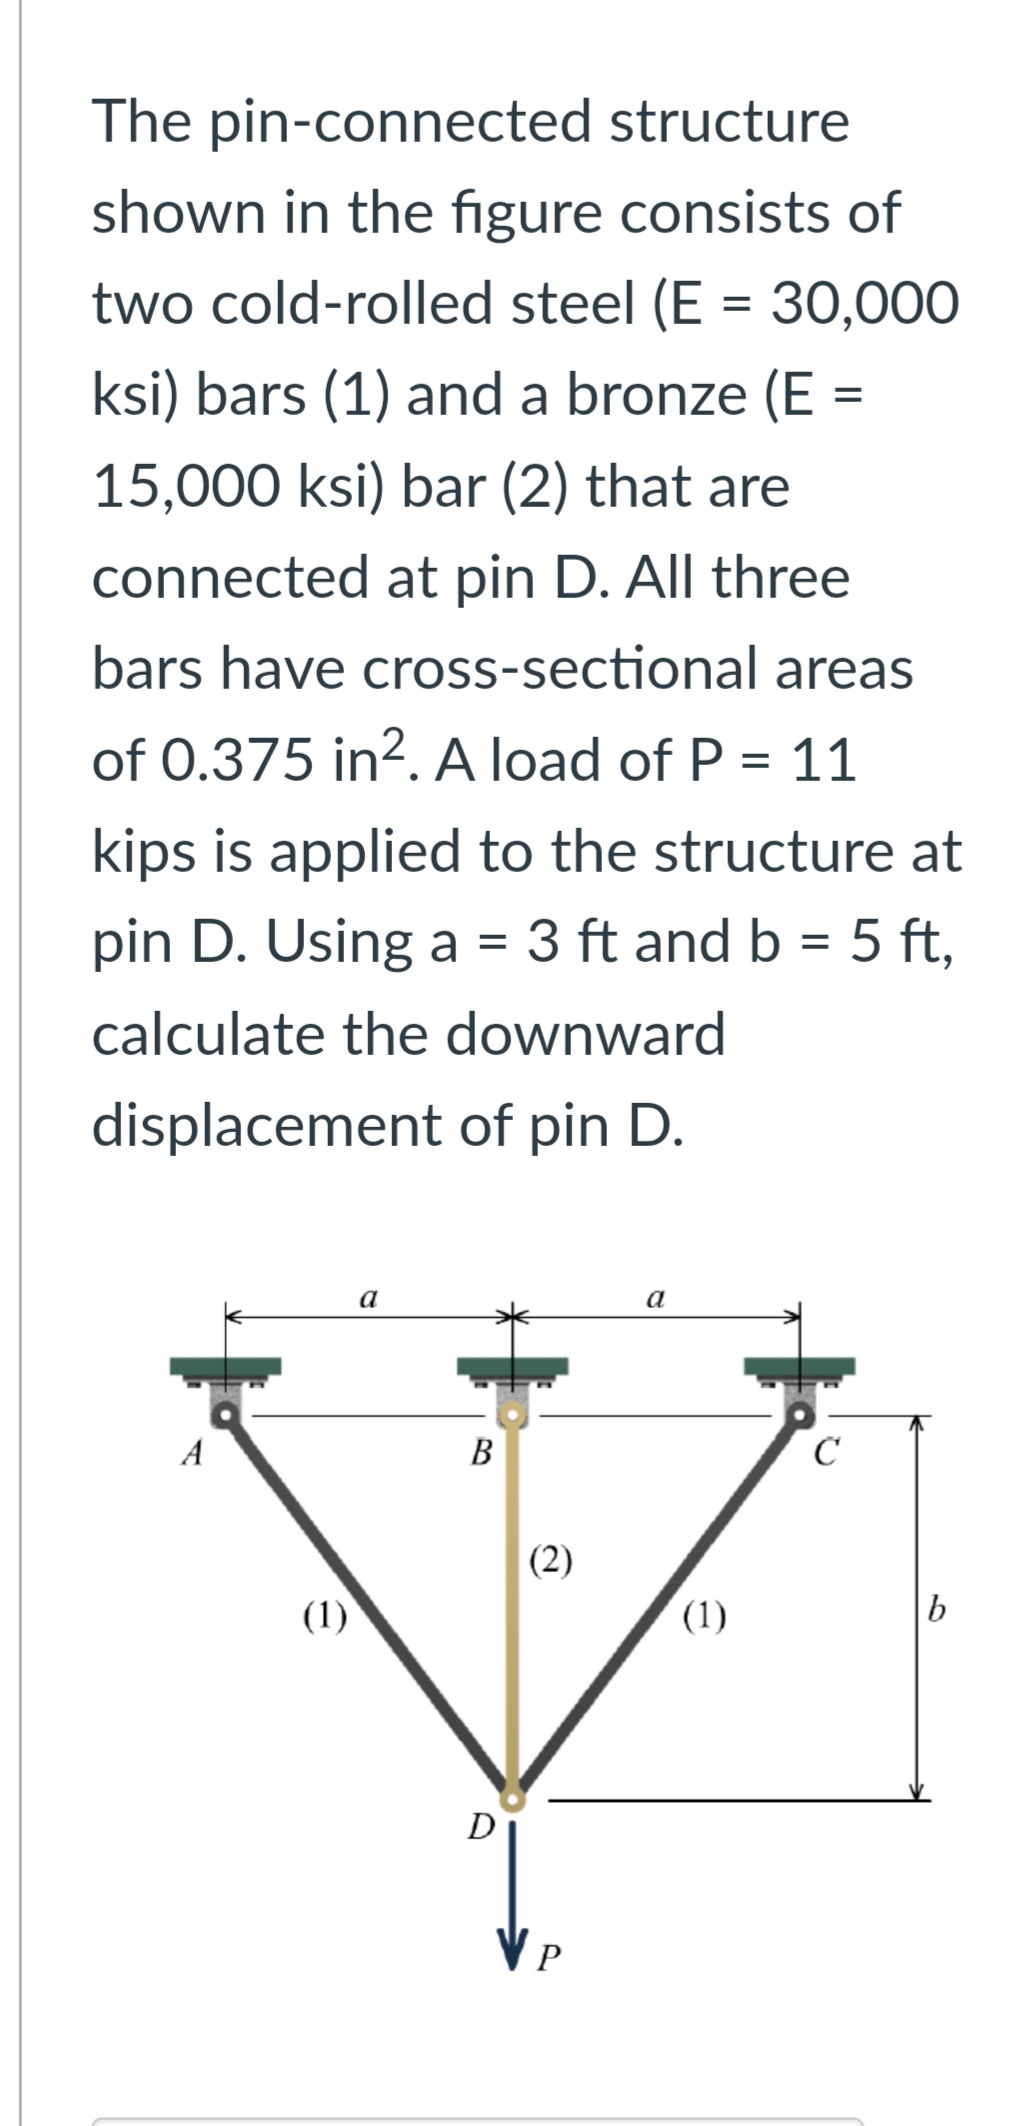 The pin-connected structure
shown in the figure consists of
two cold-rolled steel (E = 30,000
ksi) bars (1) and a bronze (E =
15,000 ksi) bar (2) that are
connected at pin D. All three
bars have cross-sectional areas
of 0.375 in². A load of P = 11
kips is applied to the structure at
pin D. Using a = 3 ft and b = 5 ft,
calculate the downward
displacement of pin D.
A
(1)
a
B
D
(2)
VP
a
(1)
C
b